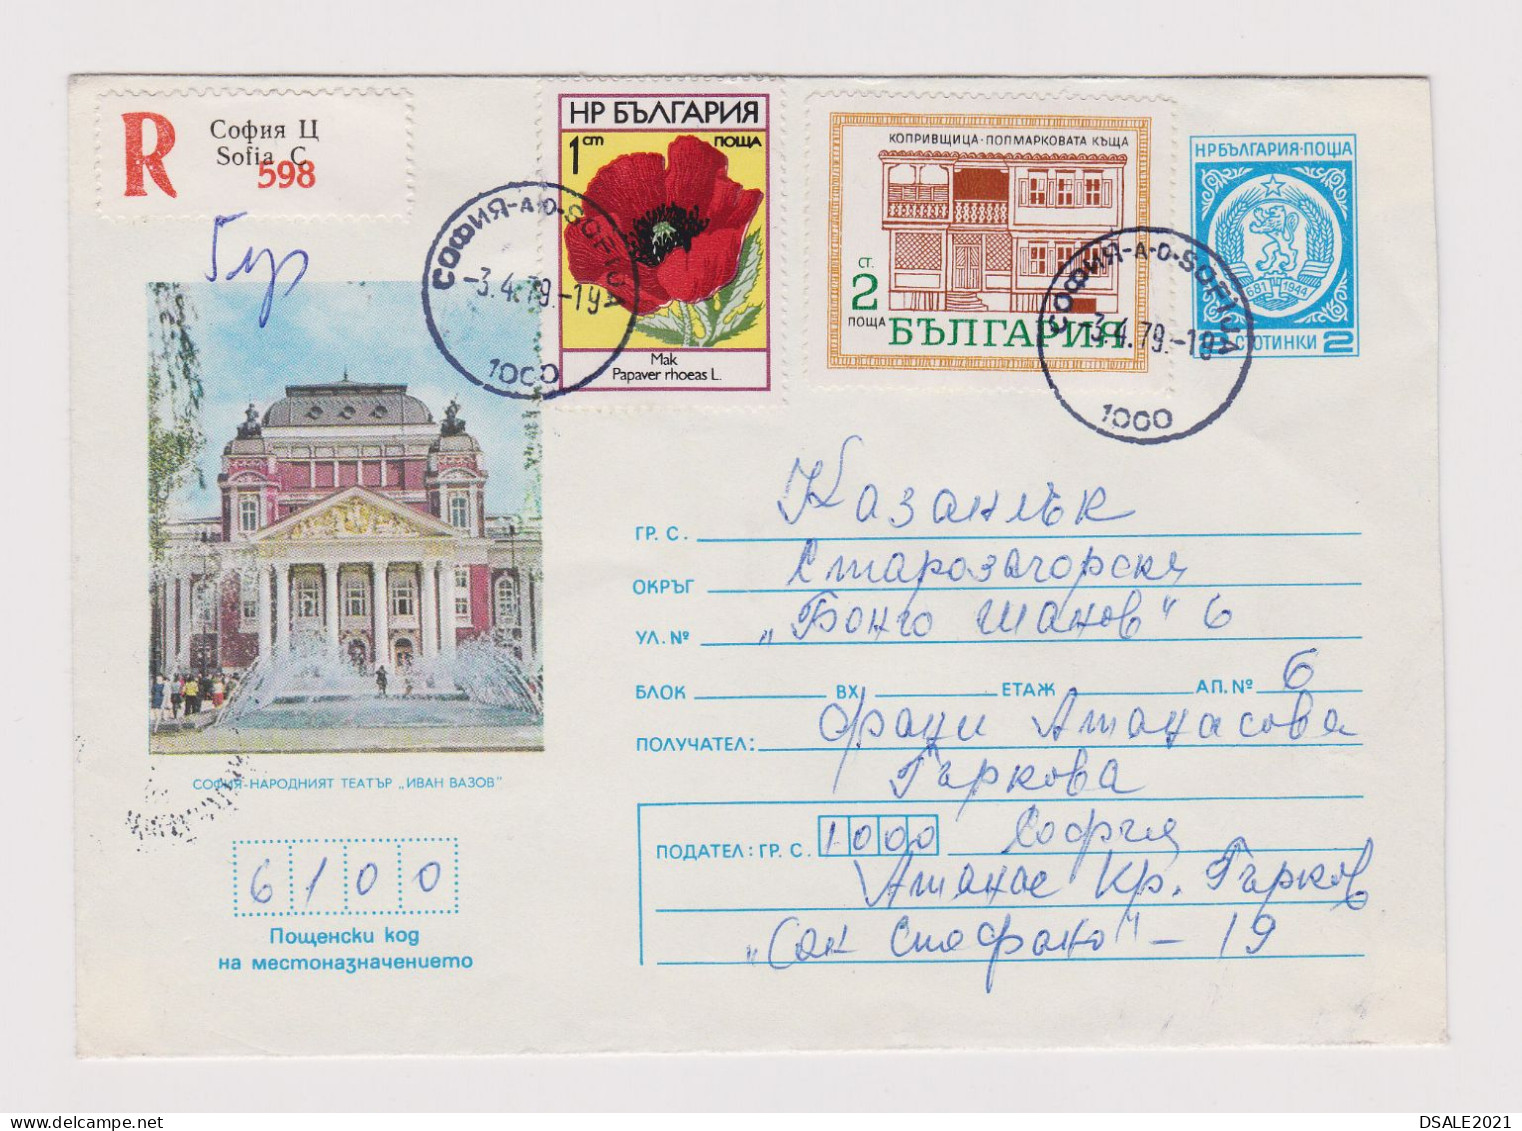 Bulgaria Bulgarien 1979 Ganzsachen R-Brief, Postal Stationery Cover, Registered W/Topic Stamps Flower, Architecture /857 - Covers